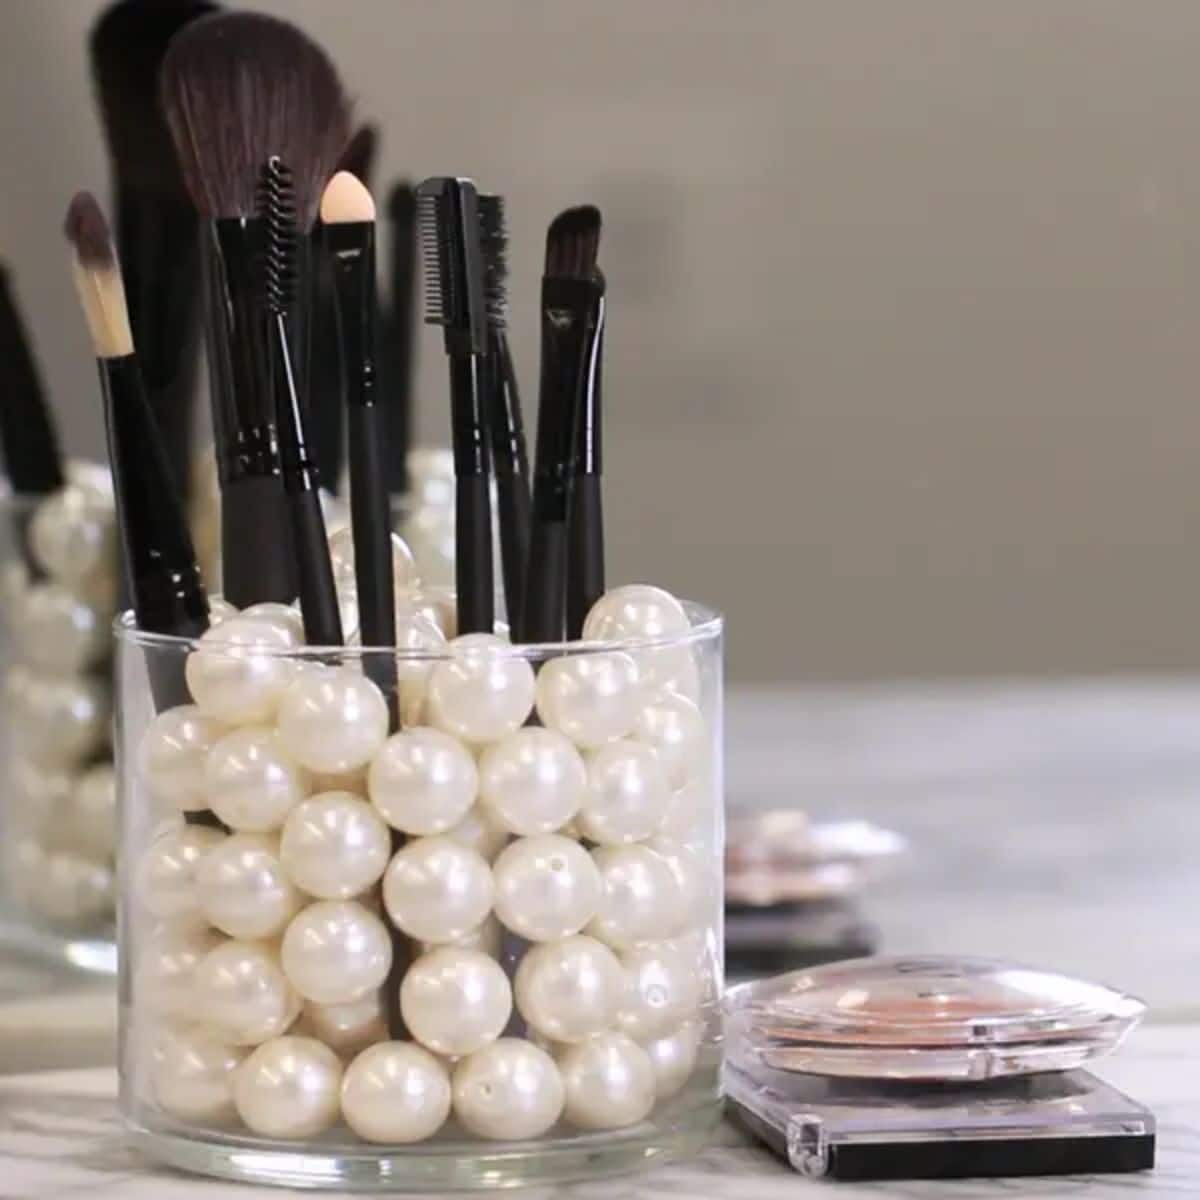 A repurposed candle jar as a make-up organizer.